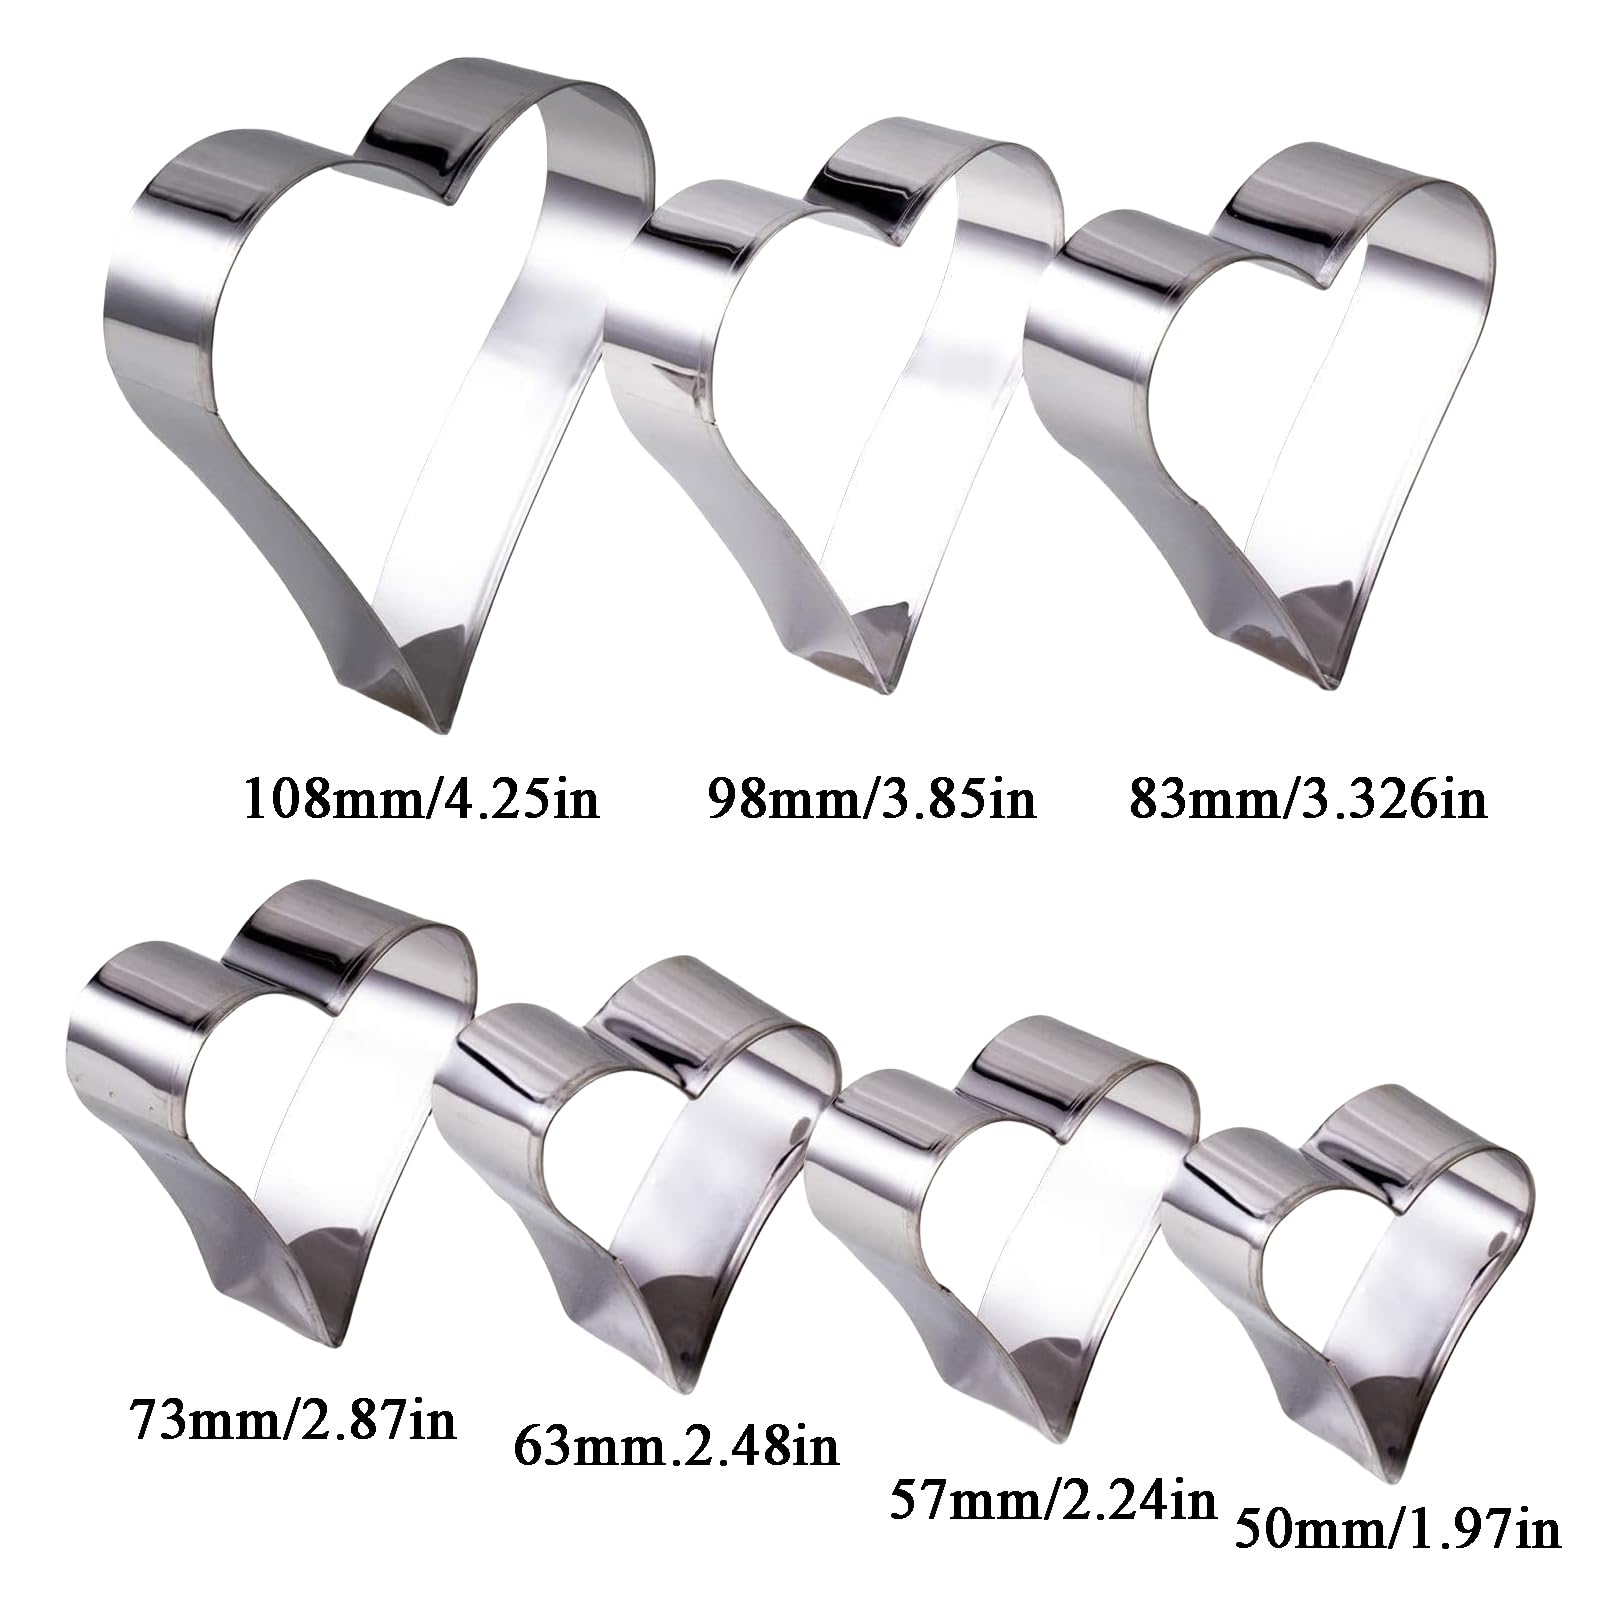 TINGSING Heart Cookie Cutter, 7 Piece Valentines Heart Shaped Cookie Cutters-4.25'', 3.85'', 3.26'', 2.87'', 2.48'', 2.24'',1.97'' Stainless Steel Fondant Biscuit Cutters Mold for Wedding, Anniversary